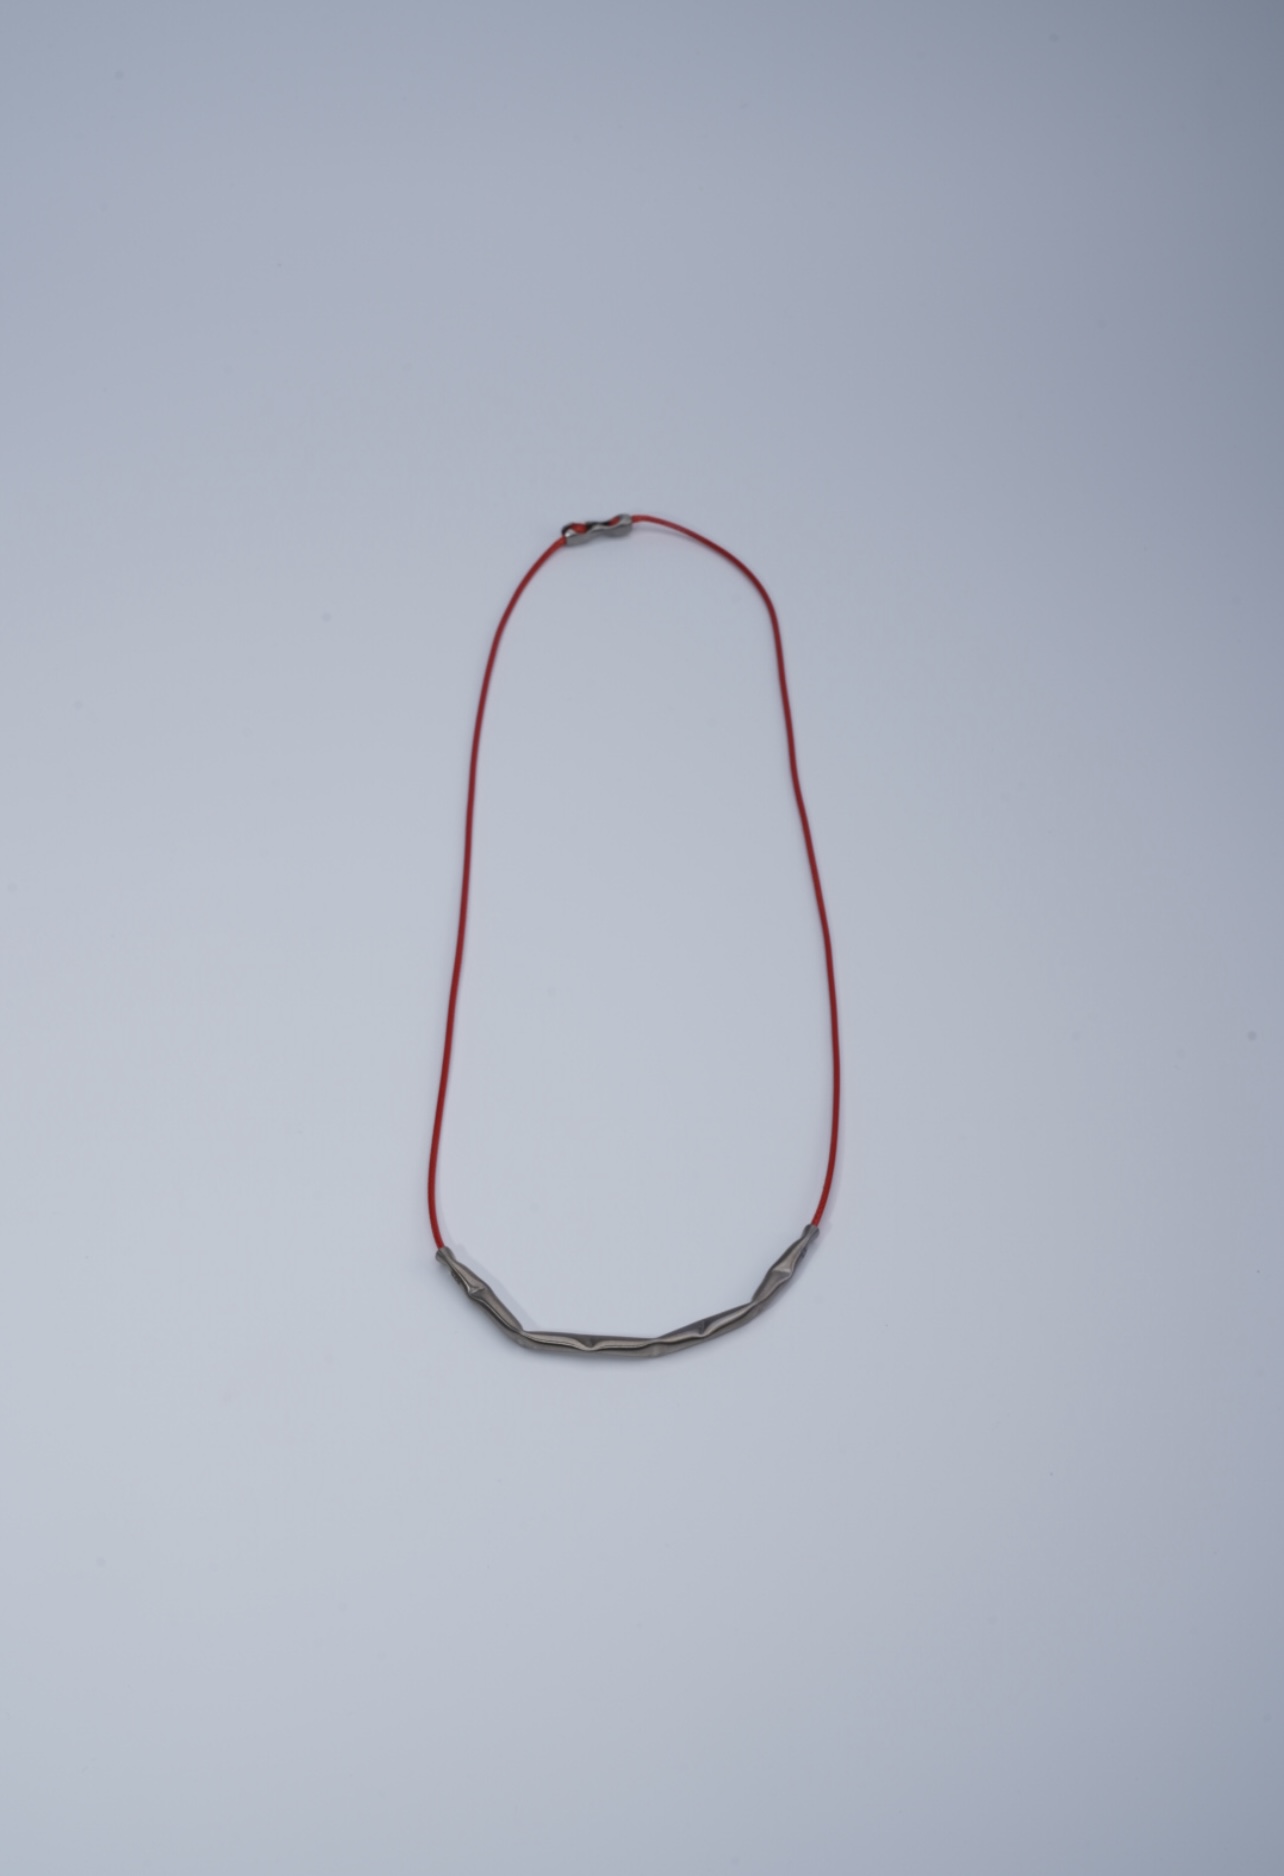 24K white gold vermeil necklace in 925 silver with red silk cord-0